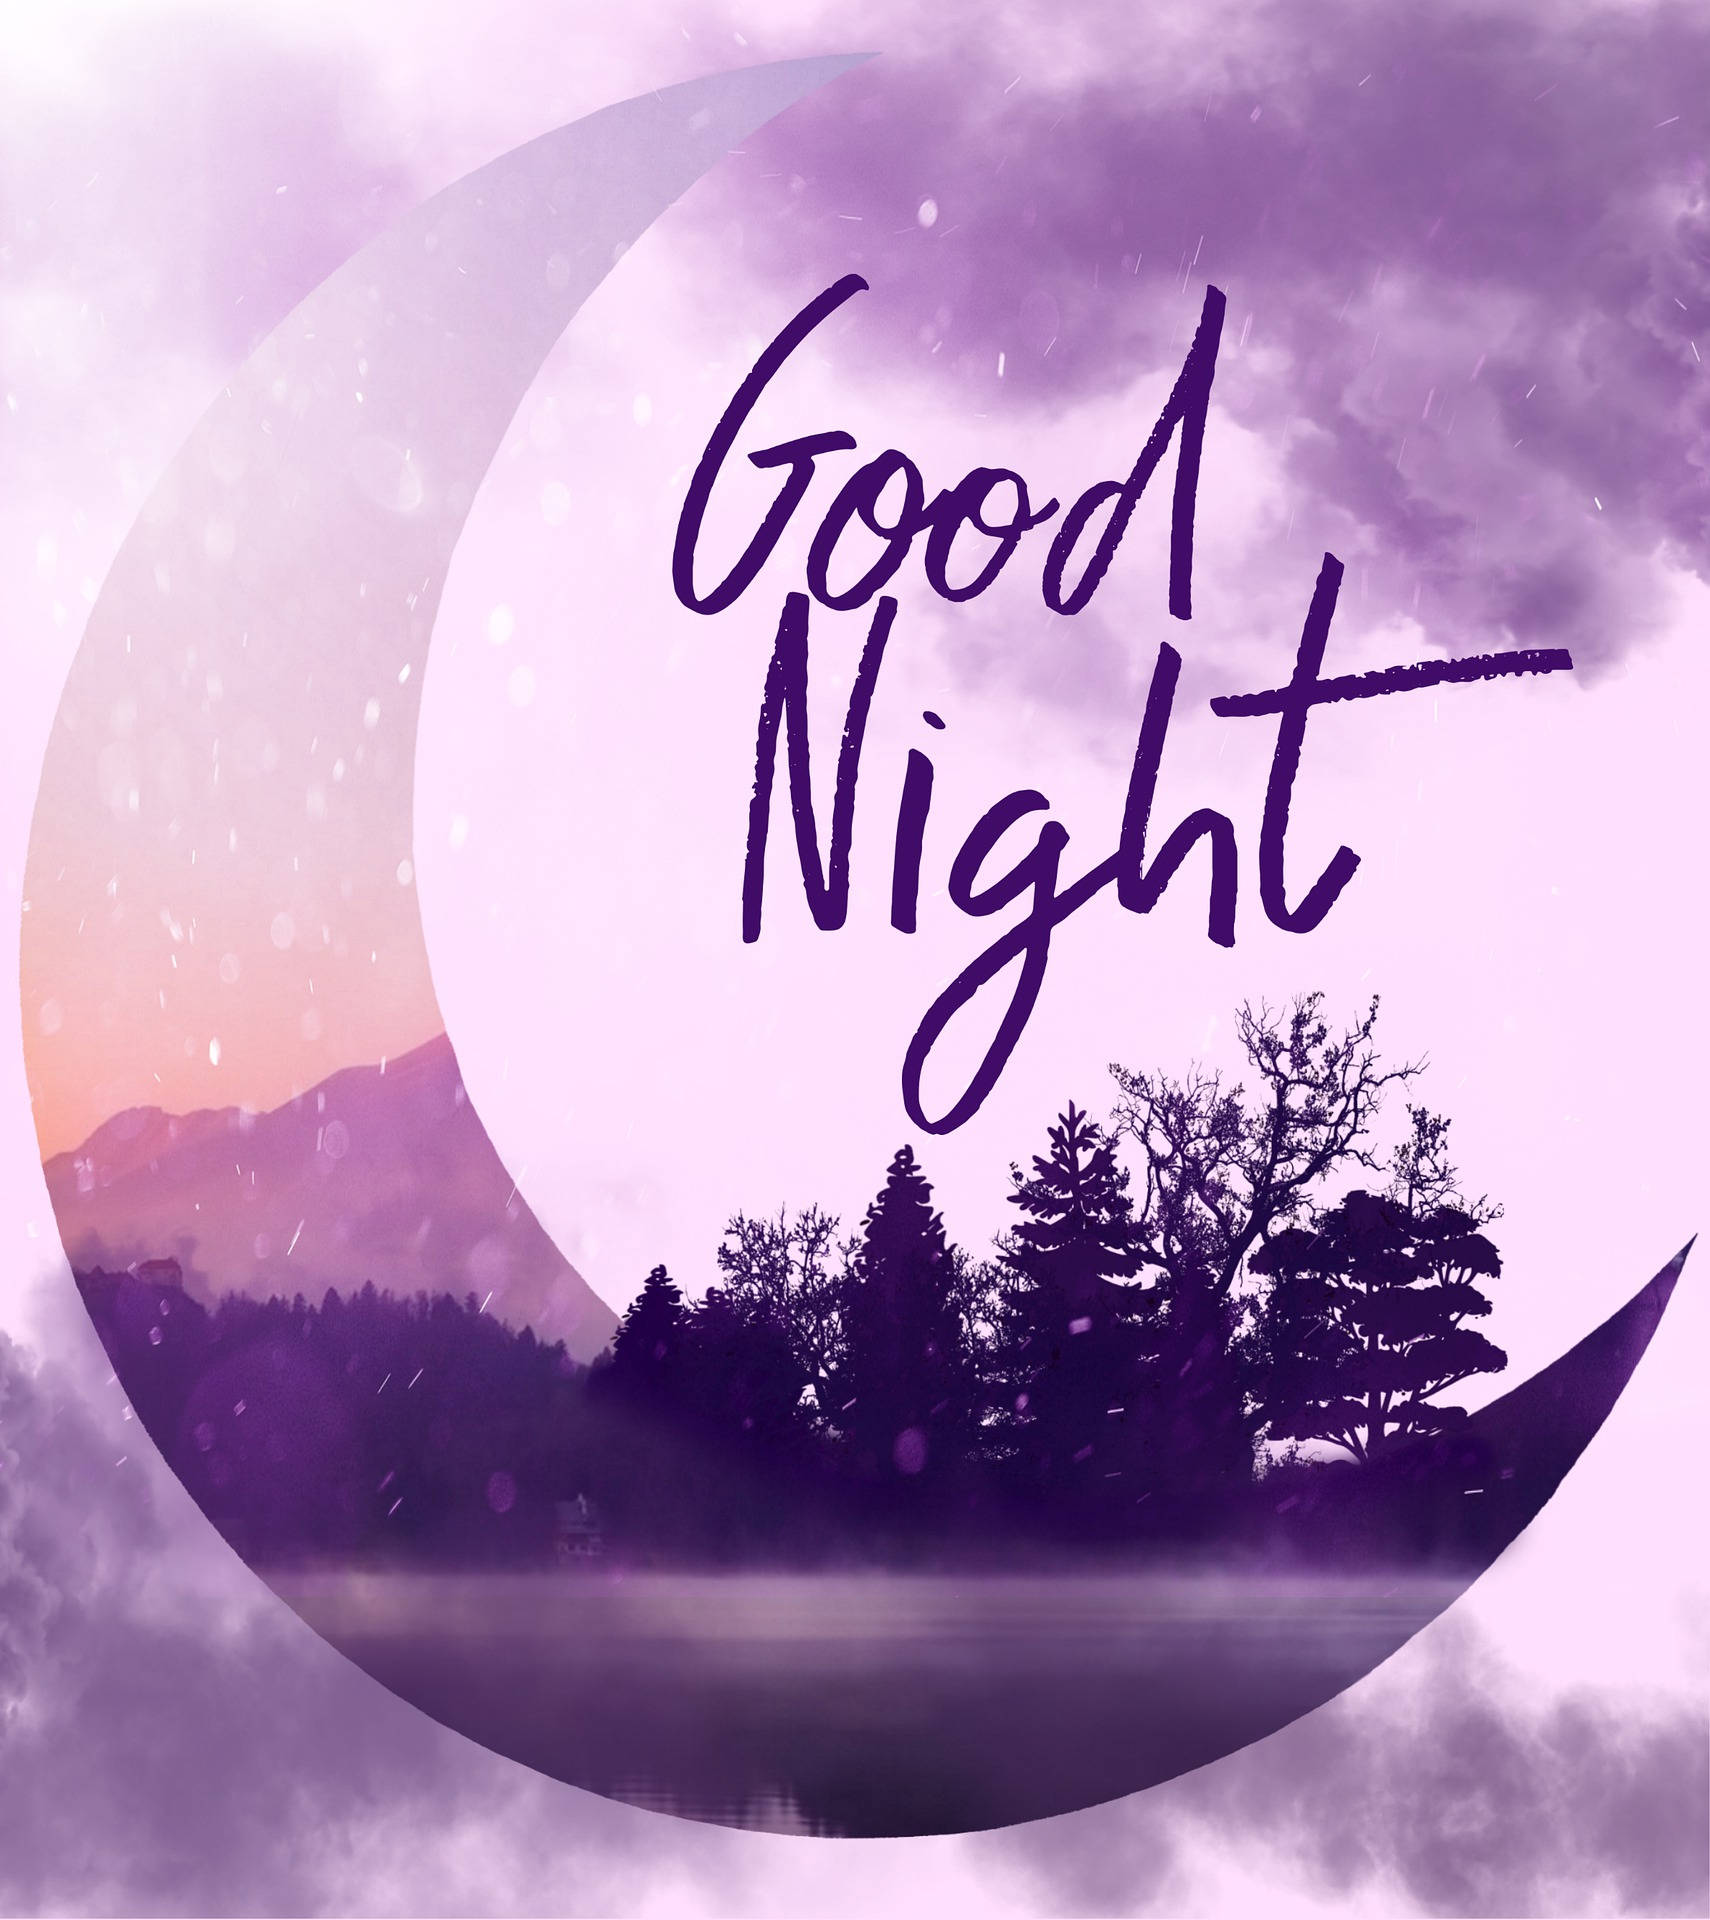 Good Night Wallpapers  Top 45 Best Good Night Images and Photos